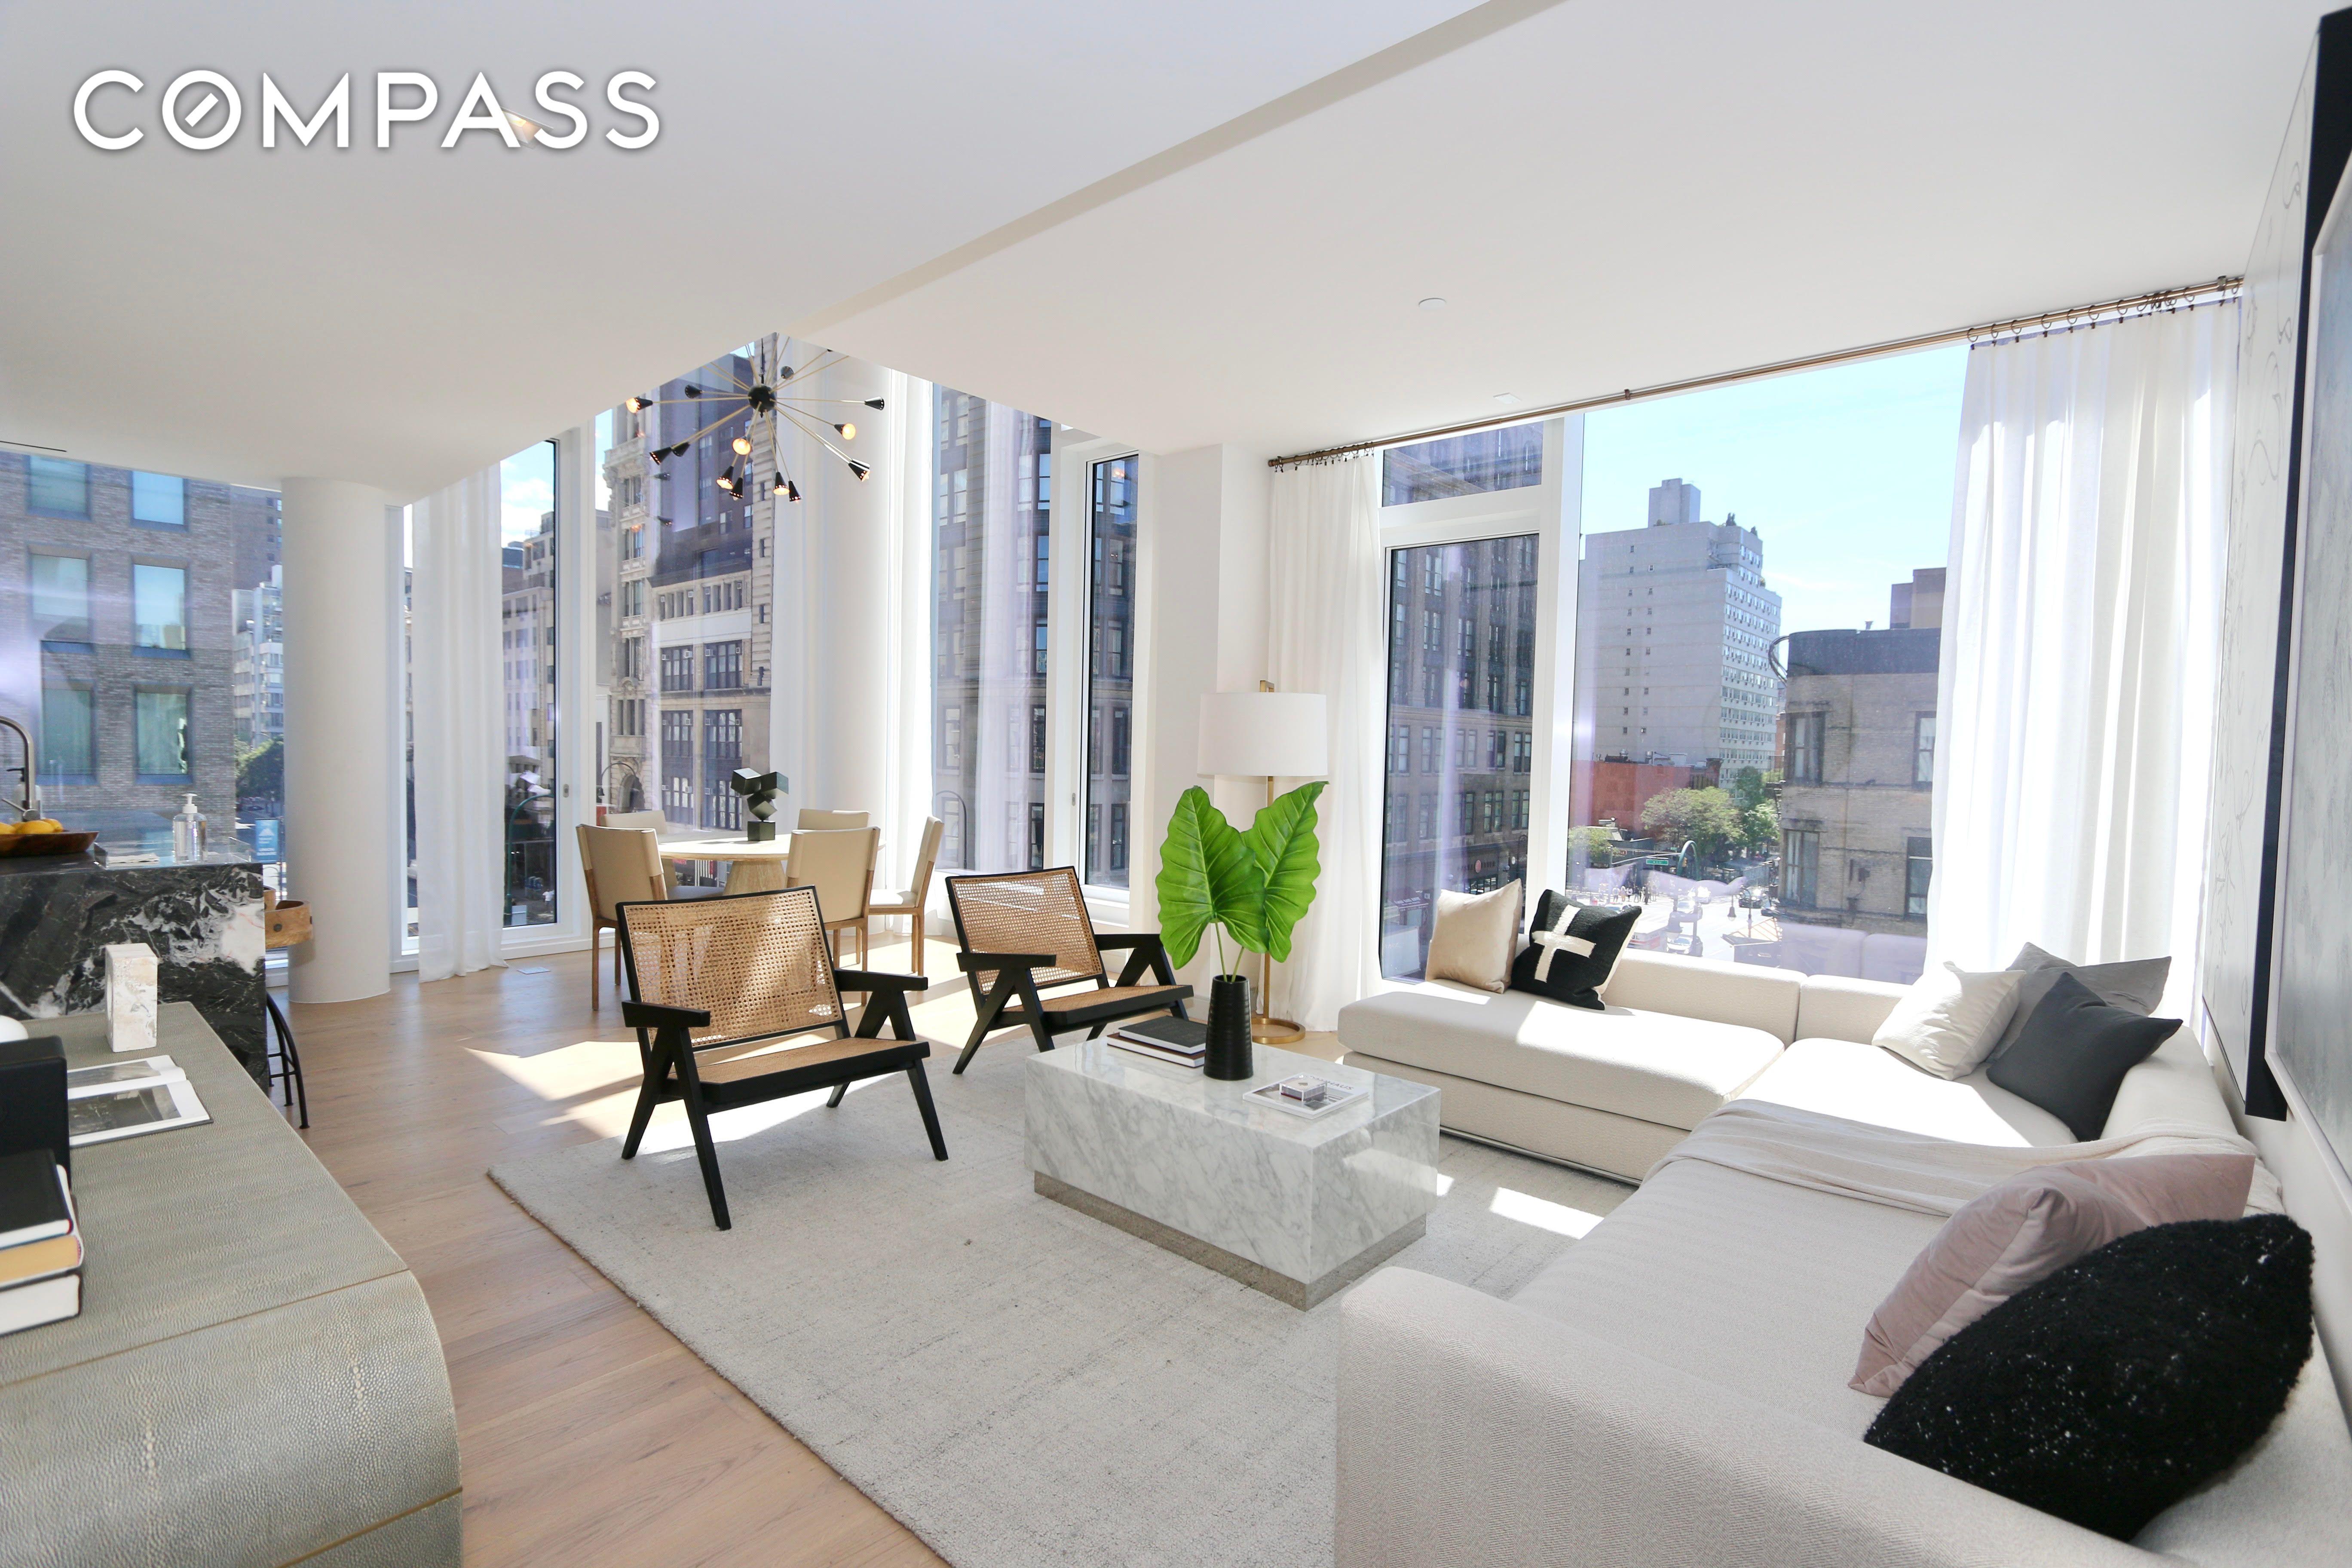 101 West 14th Street 4D, Chelsea, Downtown, NYC - 2 Bedrooms  
2 Bathrooms  
5 Rooms - 